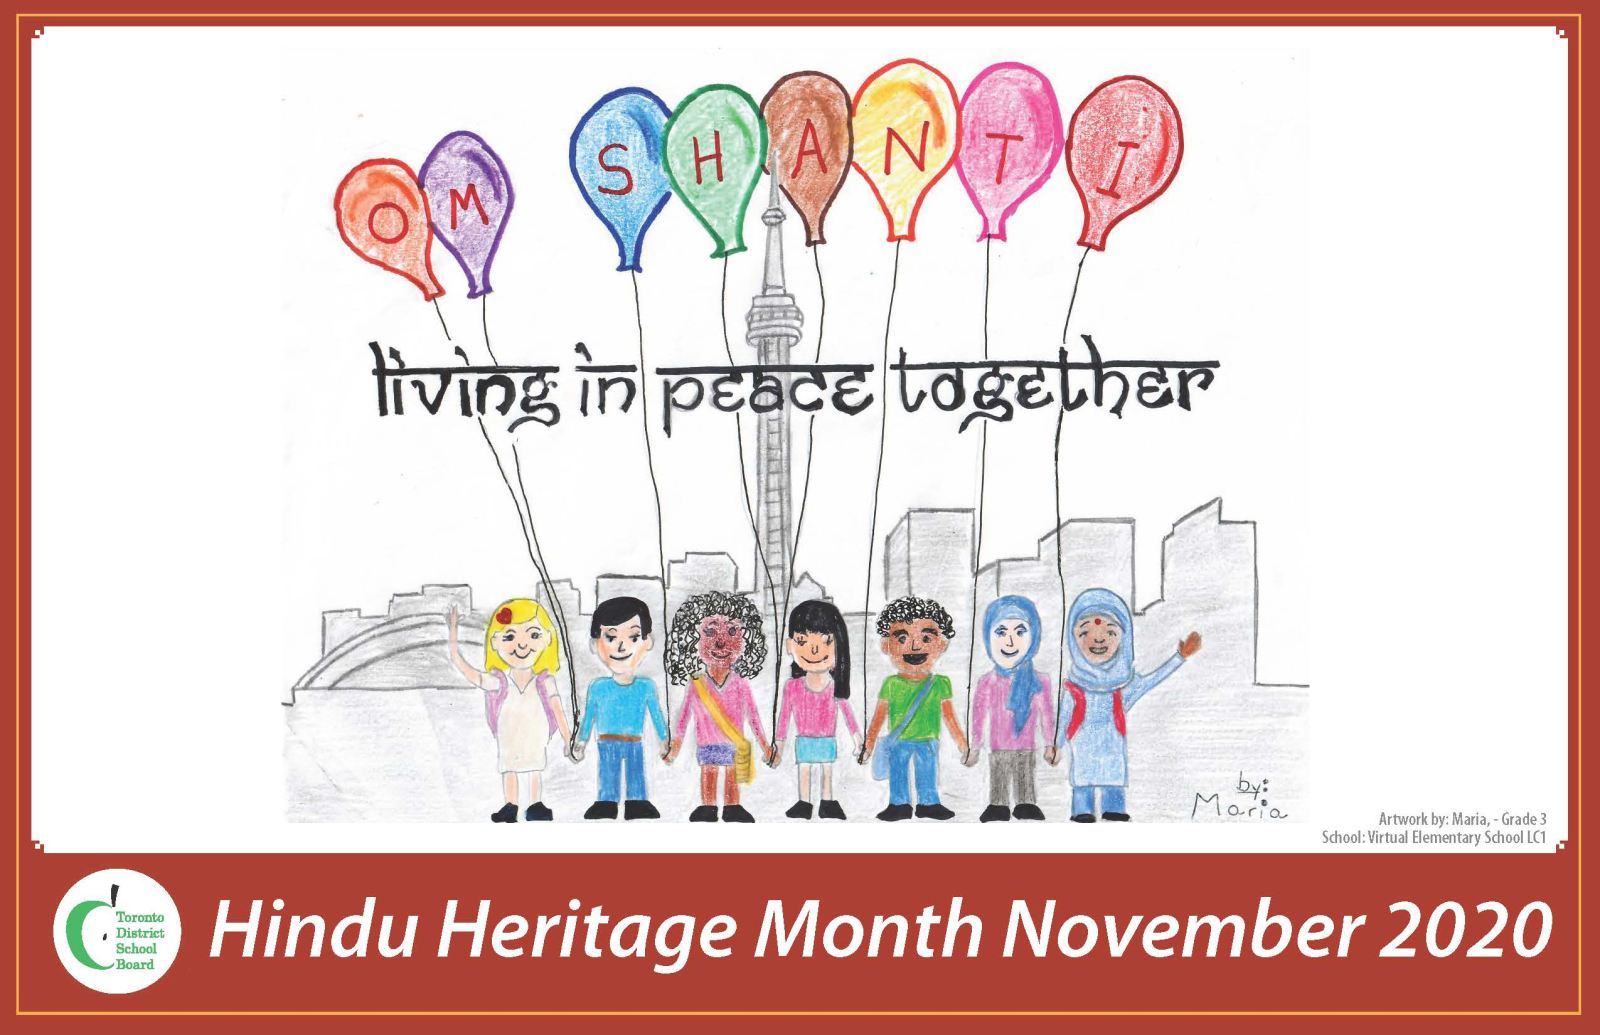 A Hindu Heritage Month poster designed by a Grade 3 student in the Virtual School shows people holding hands with balloons above their heads.